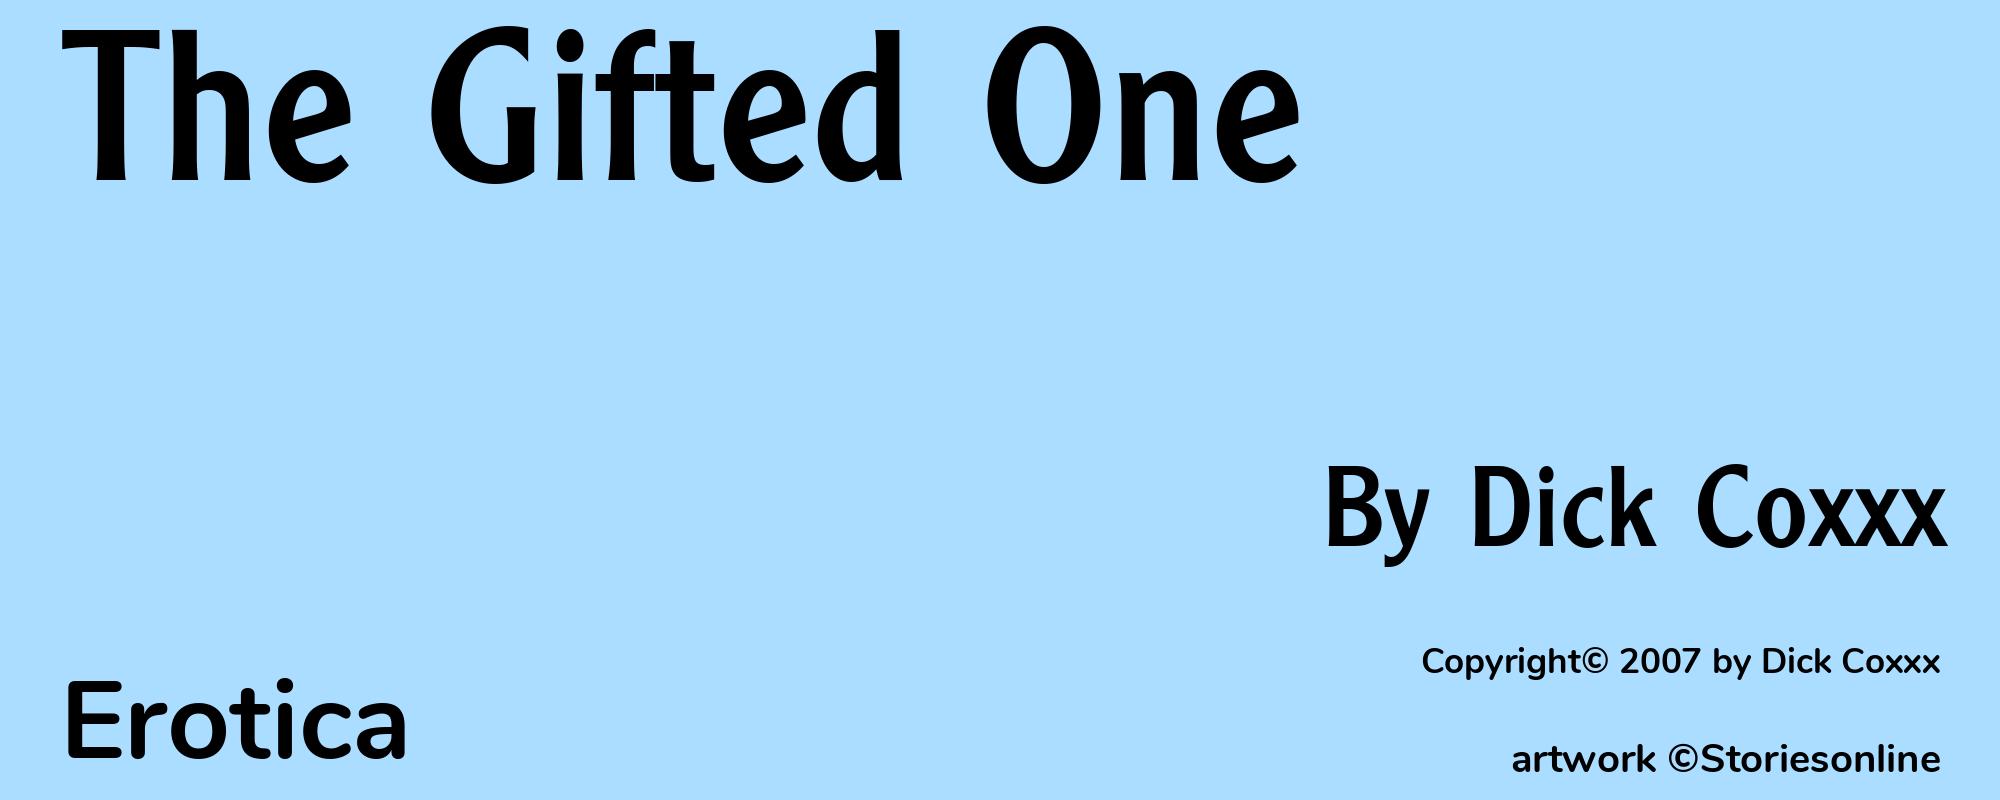 The Gifted One - Cover